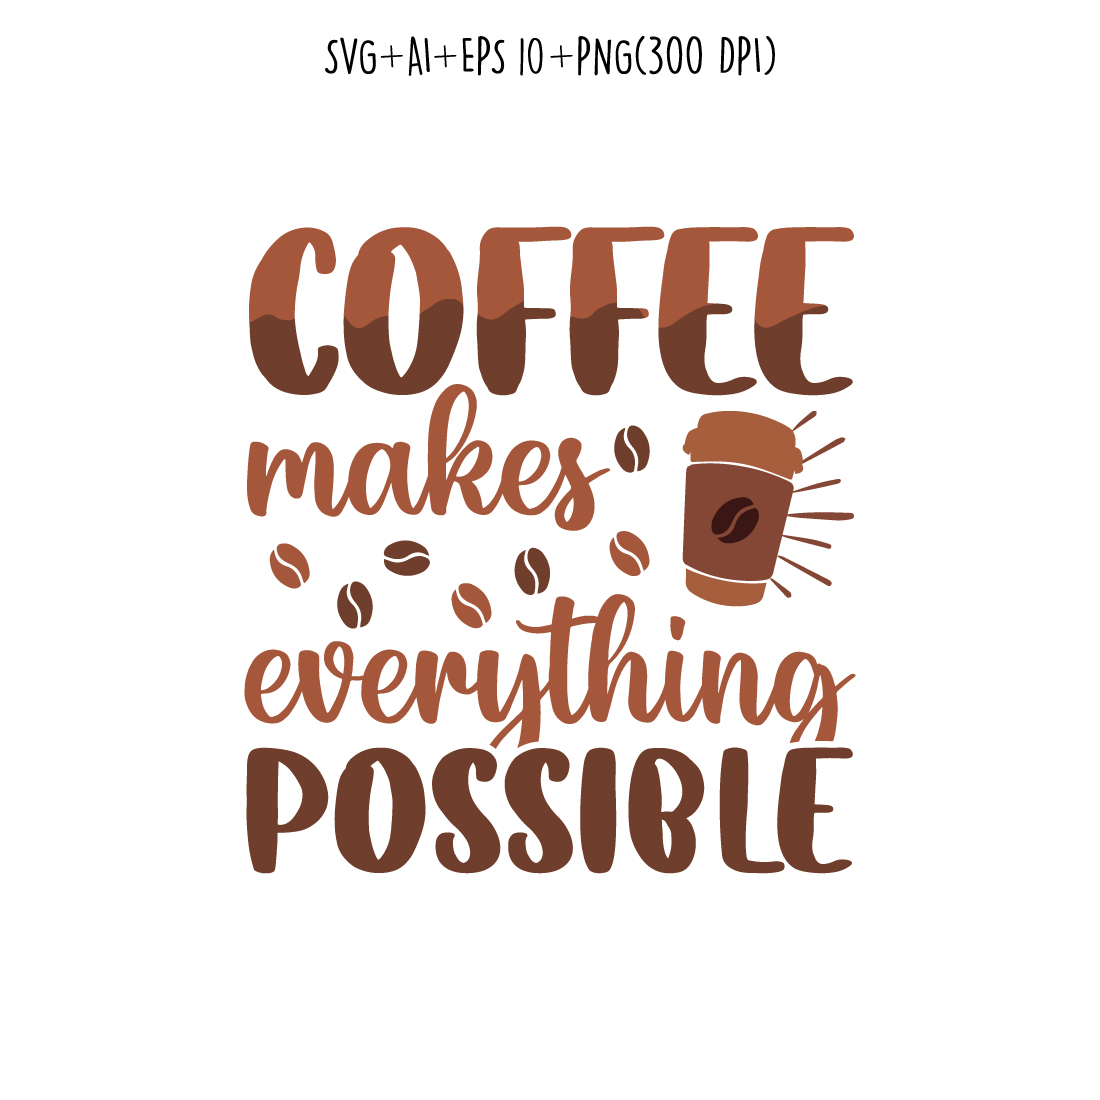 Coffee makes everything possible typography design for t-shirts, print, templates, logos, mug preview image.